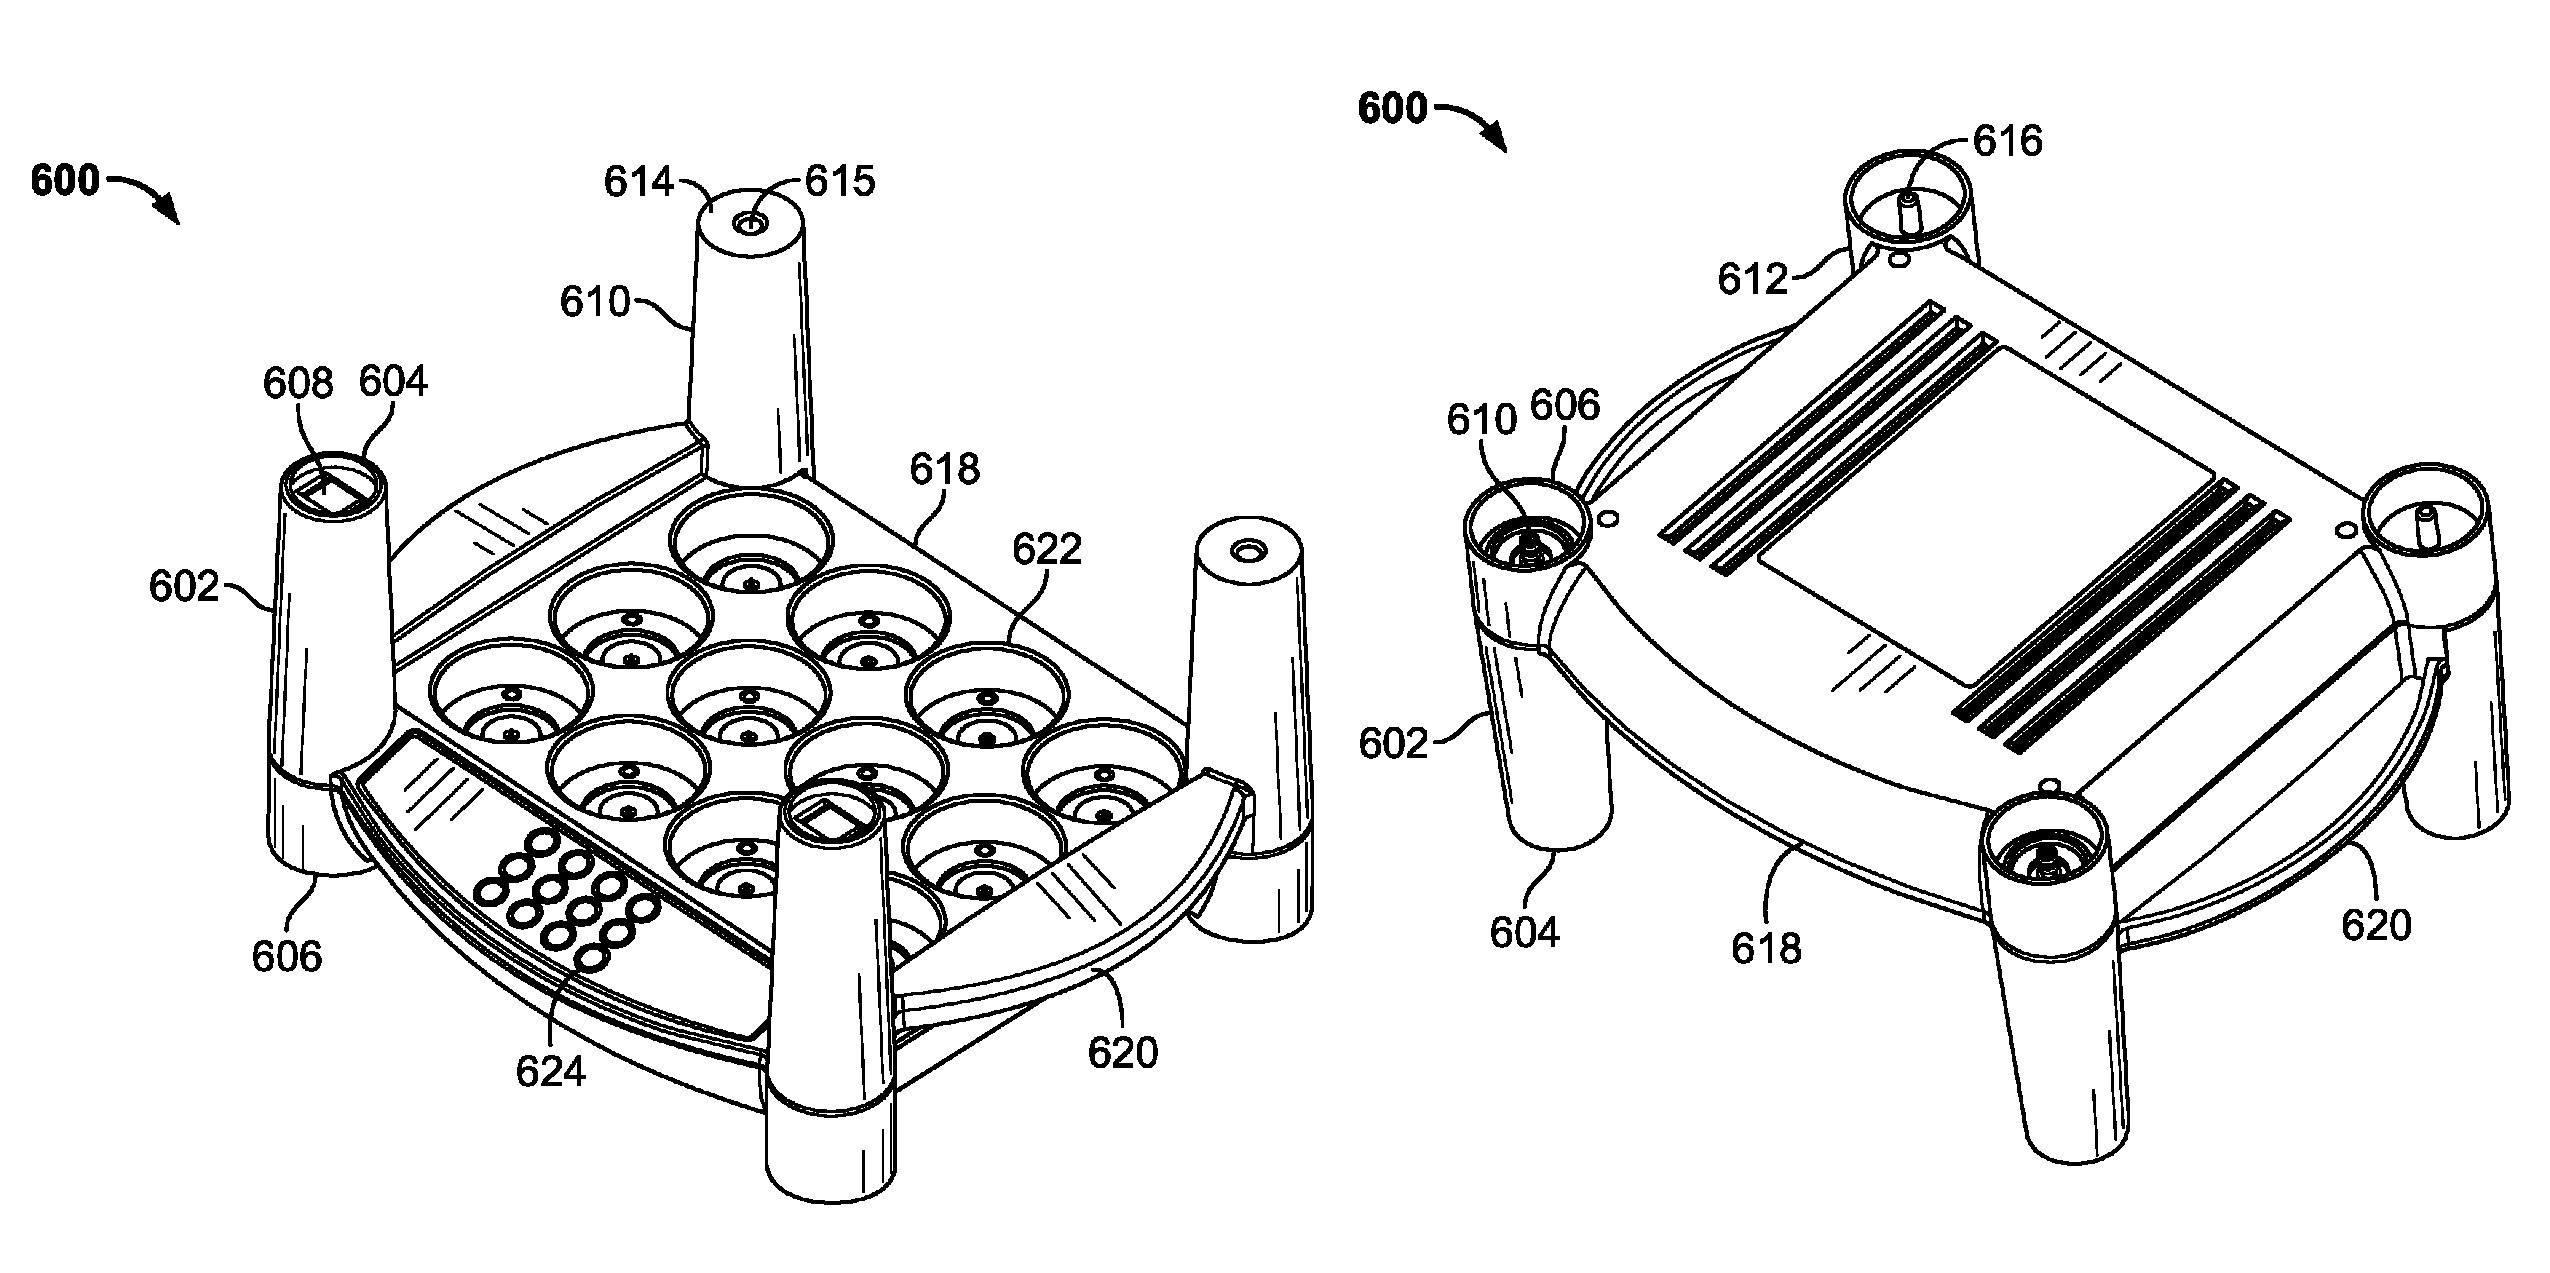 Rechargeable flameless candle systems and methods